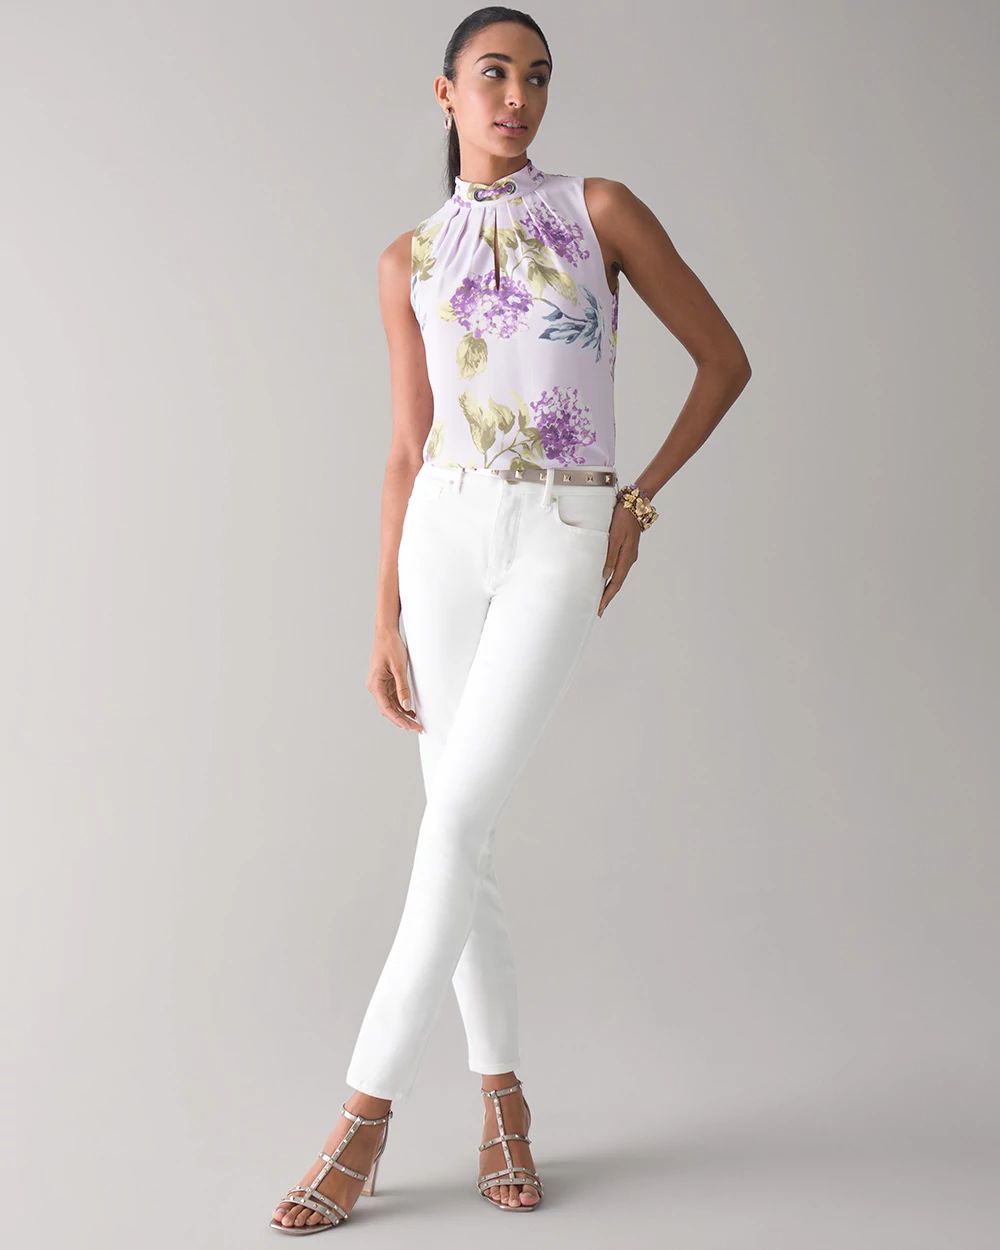 Petite High-Rise White Straight Jeans click to view larger image.